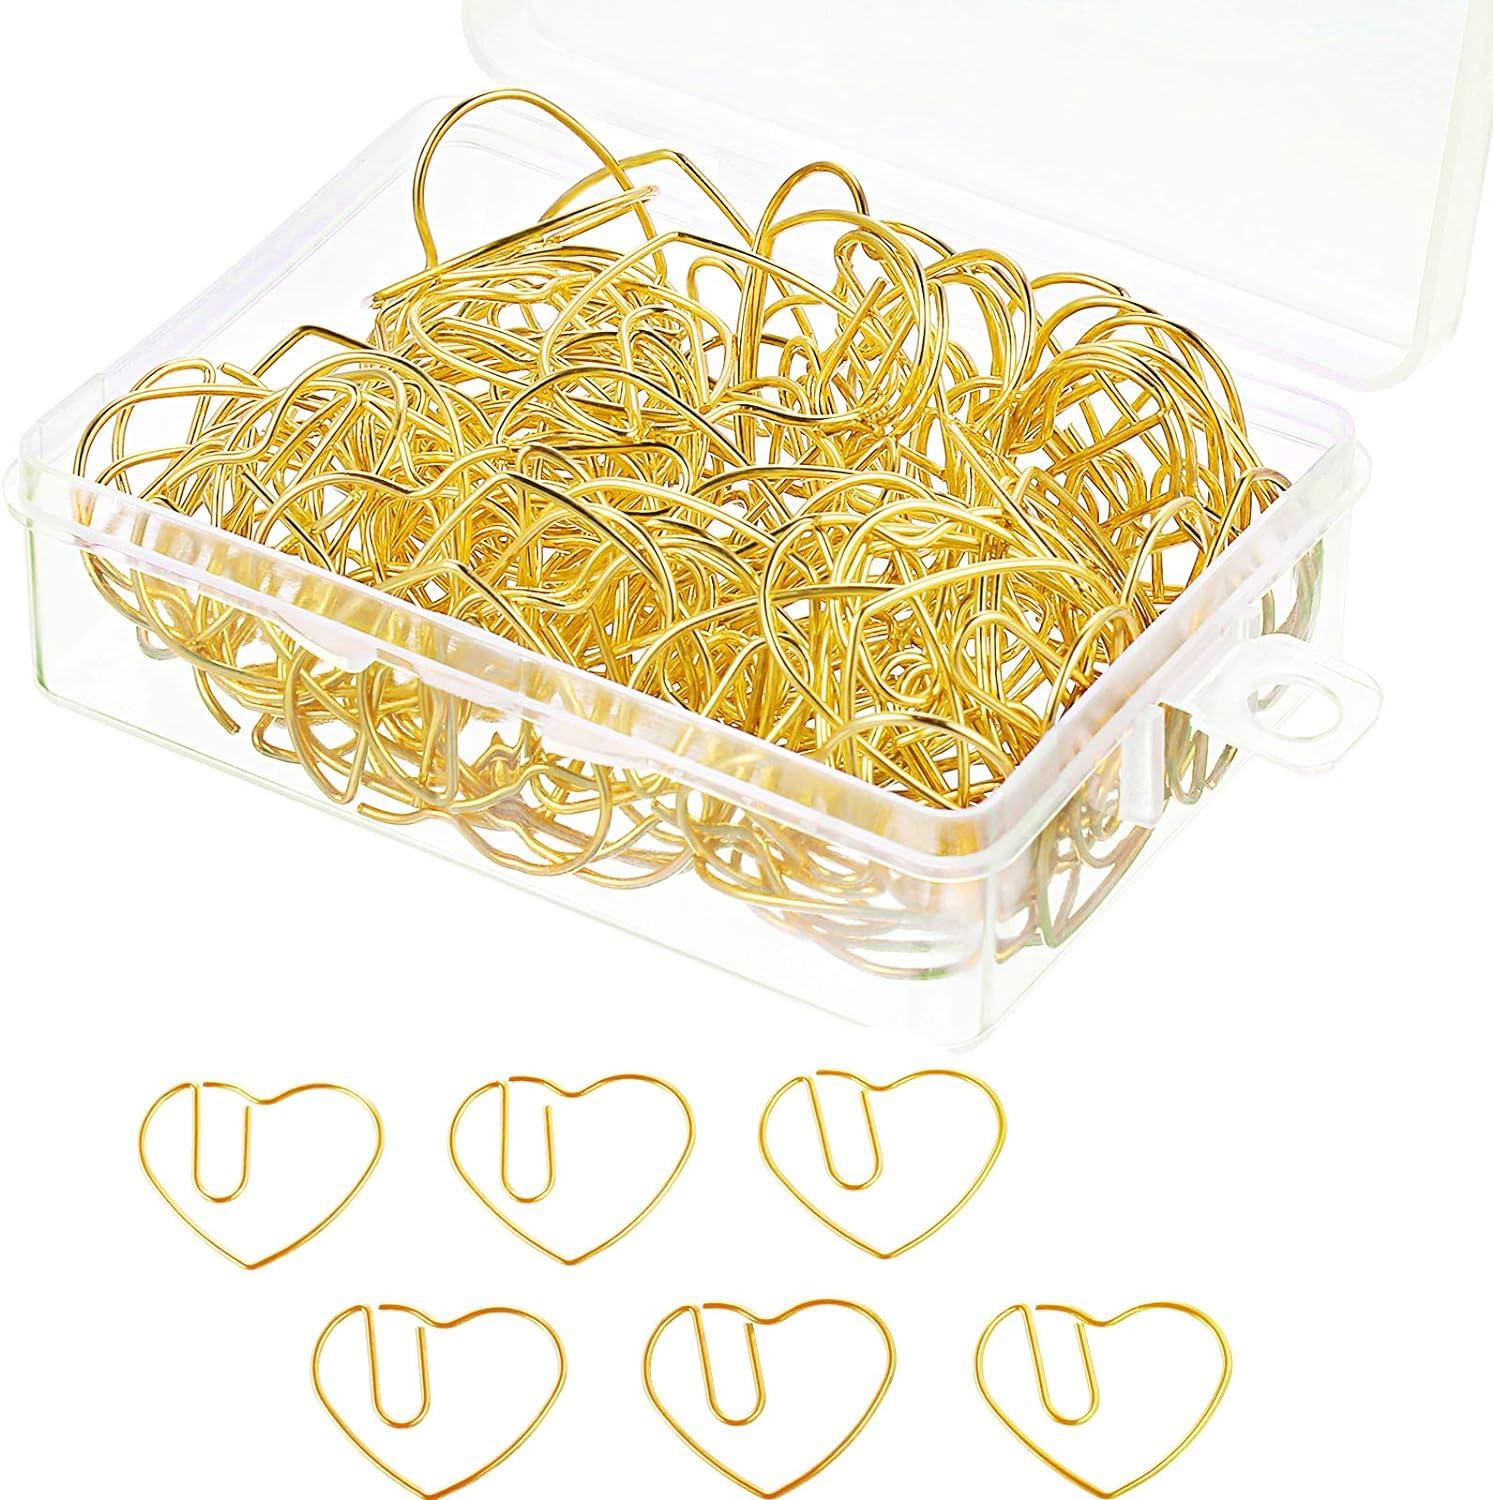 100 pieces 3 cm love heart shaped small paper clips bookmark clips for wedding marriage office school home